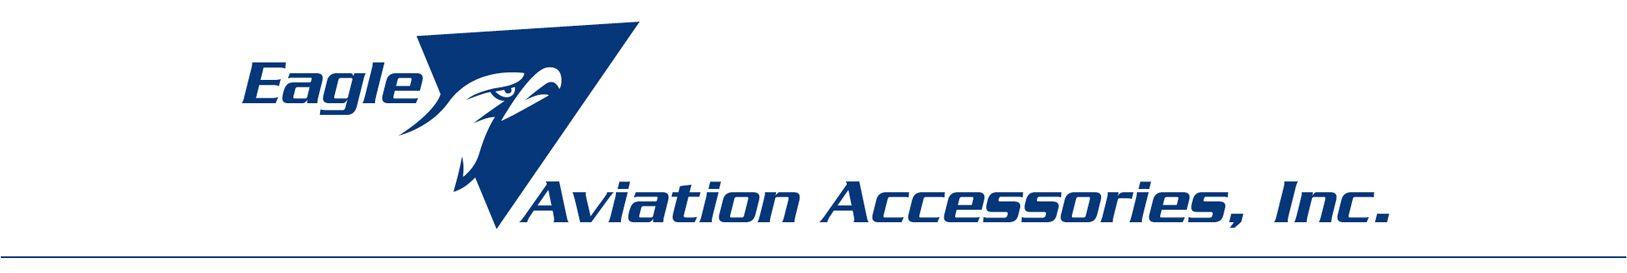 Eagle Aviation Logo - Eagle Aviation Accessories Inc ::CSD::Global supplier of commercial